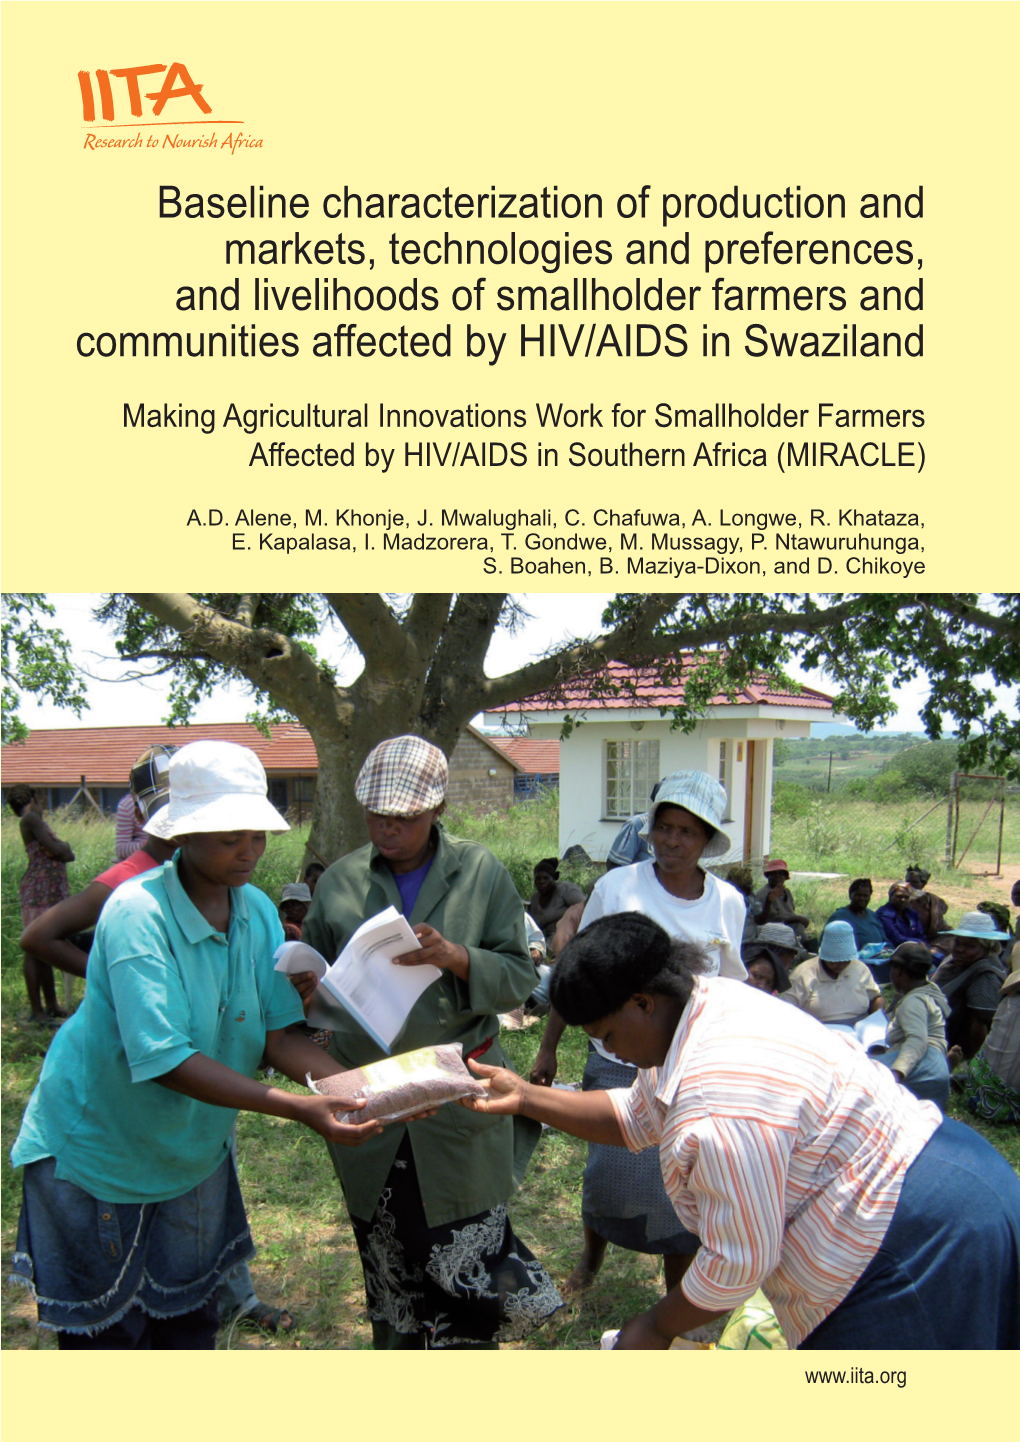 Baseline Characterization of Production and Markets, Technologies and Preferences, and Livelihoods of Smallholder Farmers and Co